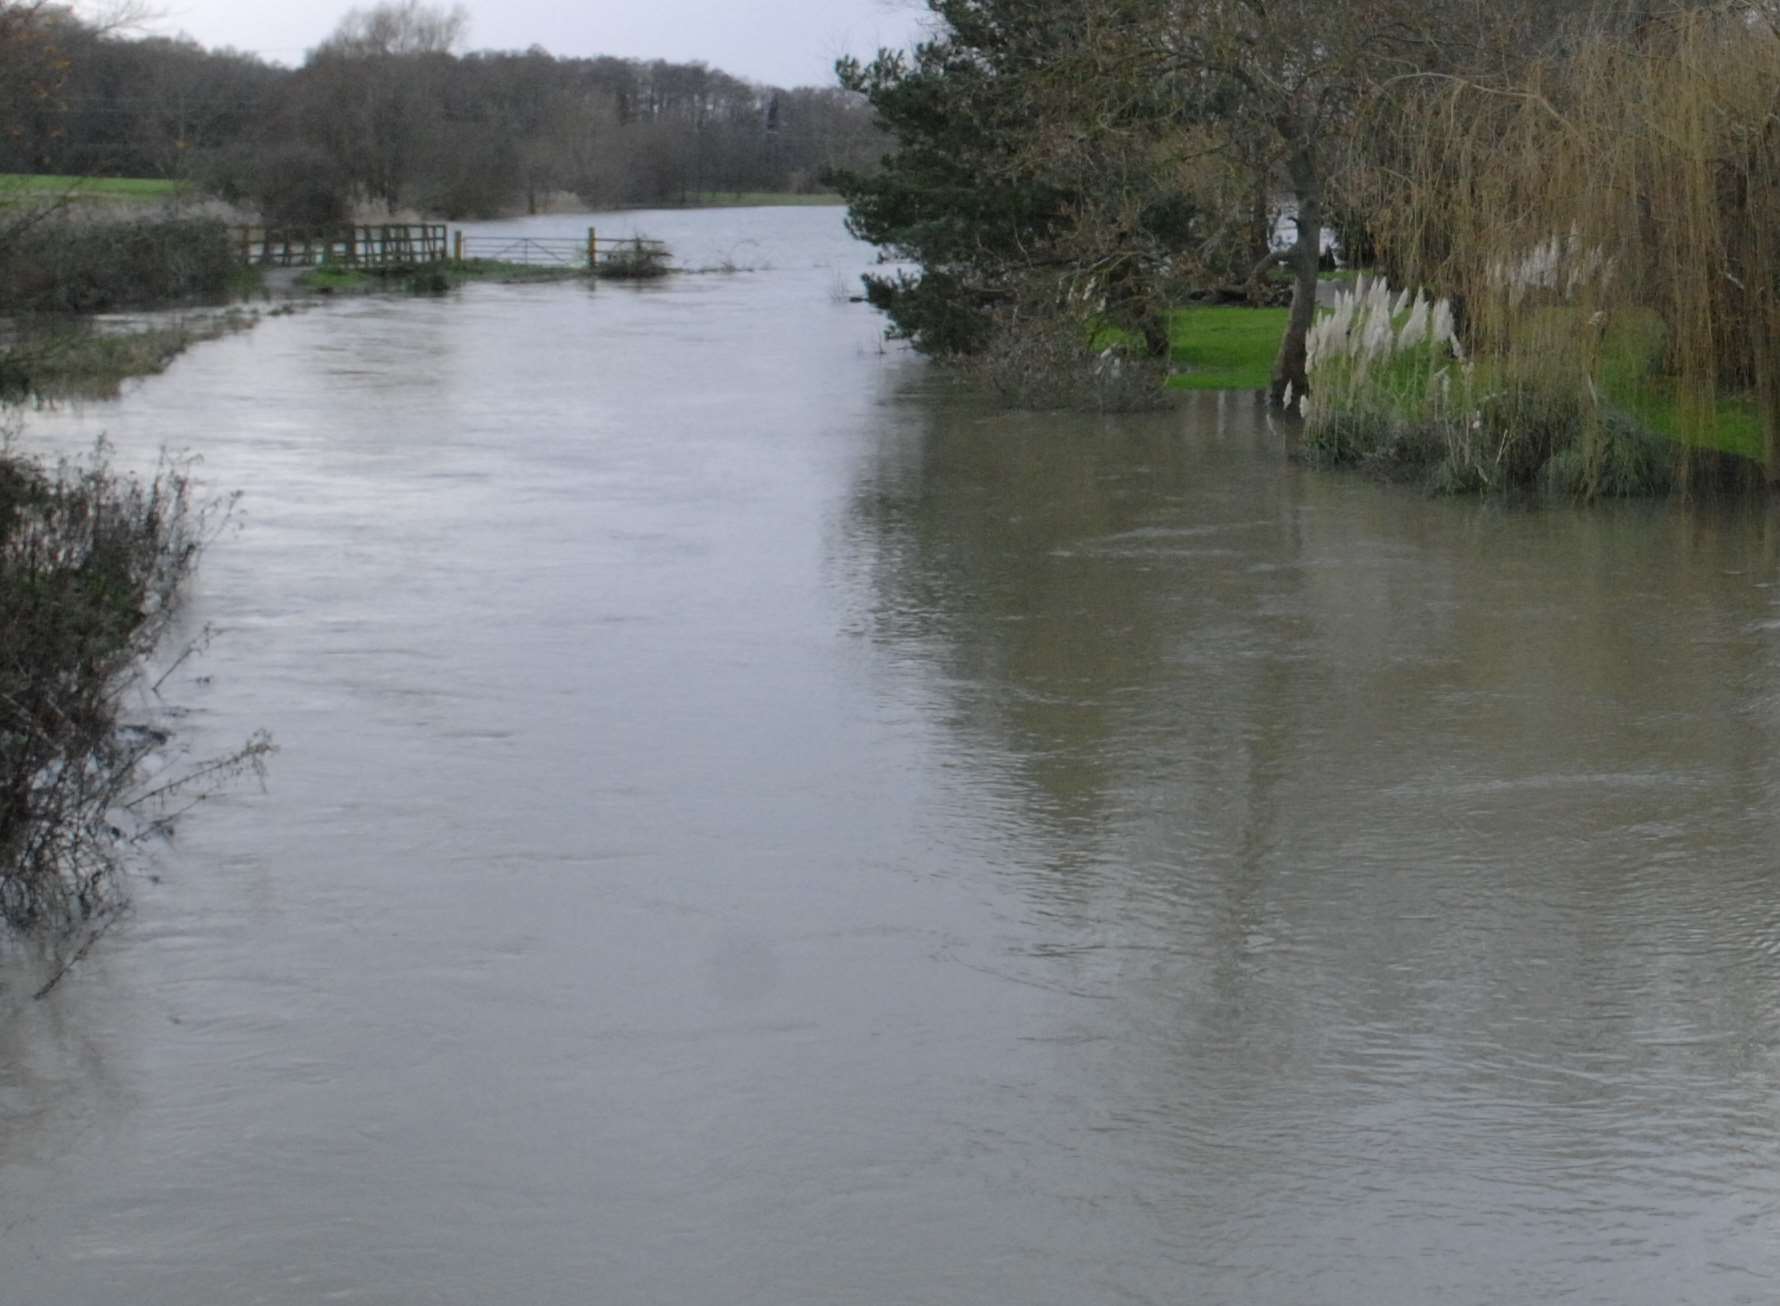 The boat was marooned in the Great Stour in Hersden. Stock image.